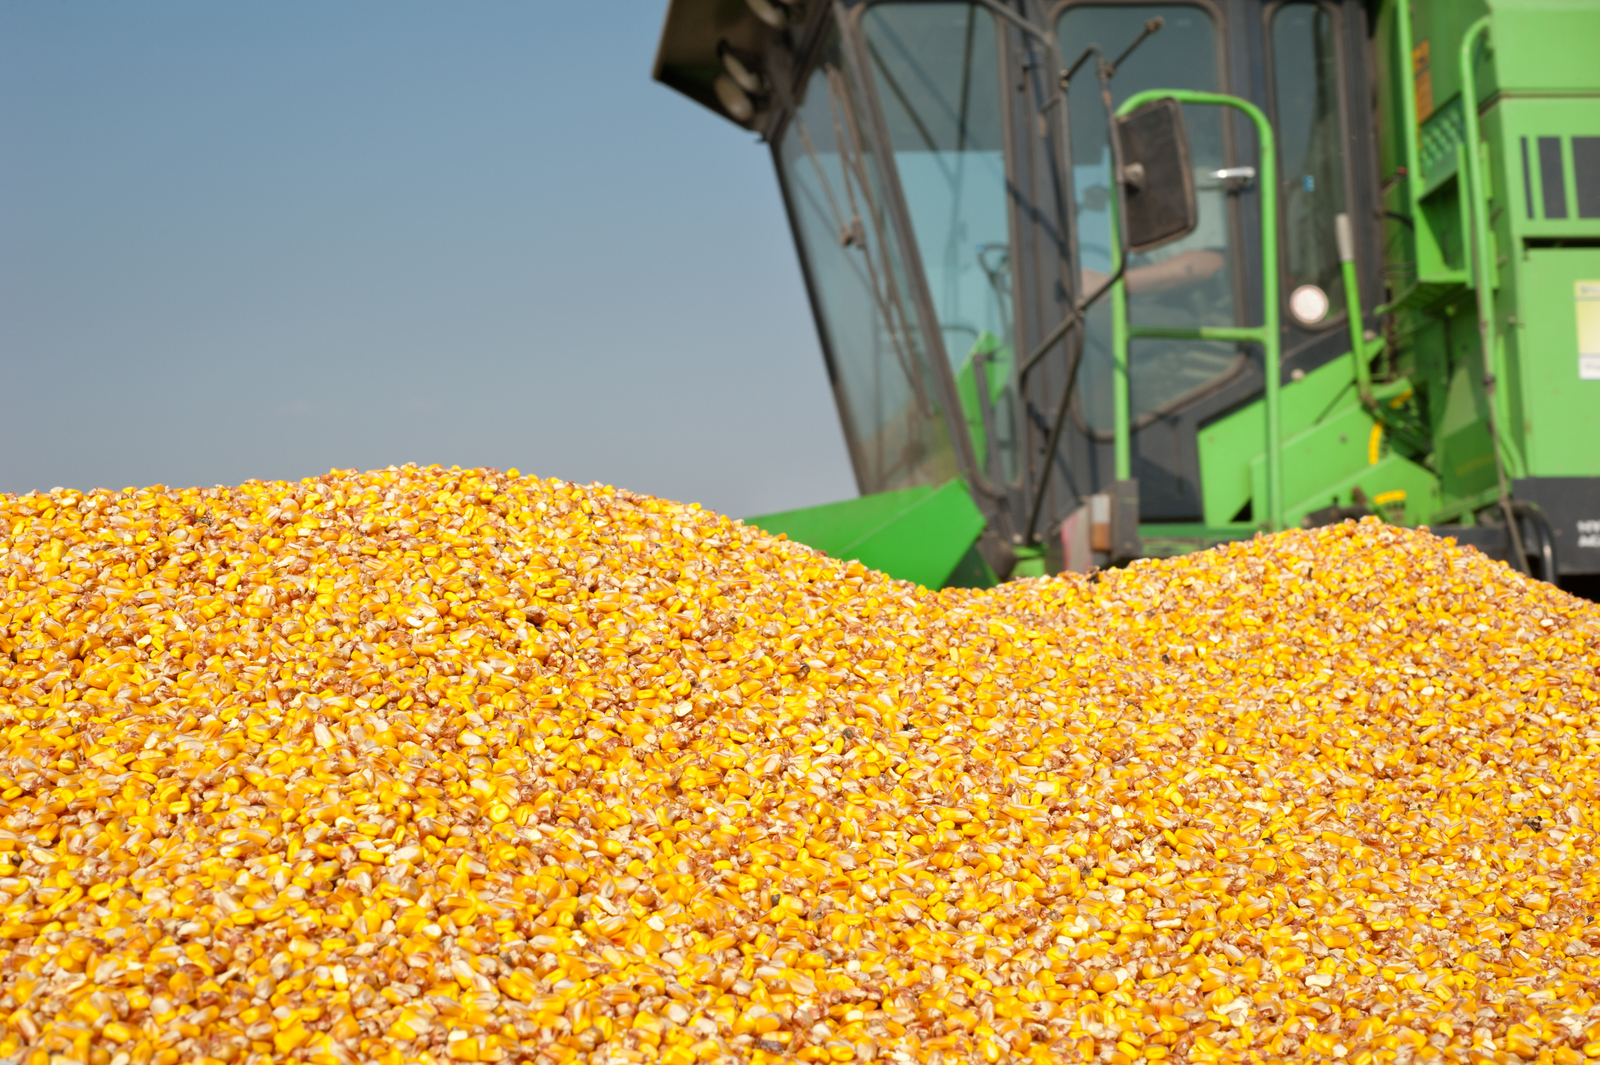 How to combat multiple mycotoxins in feed